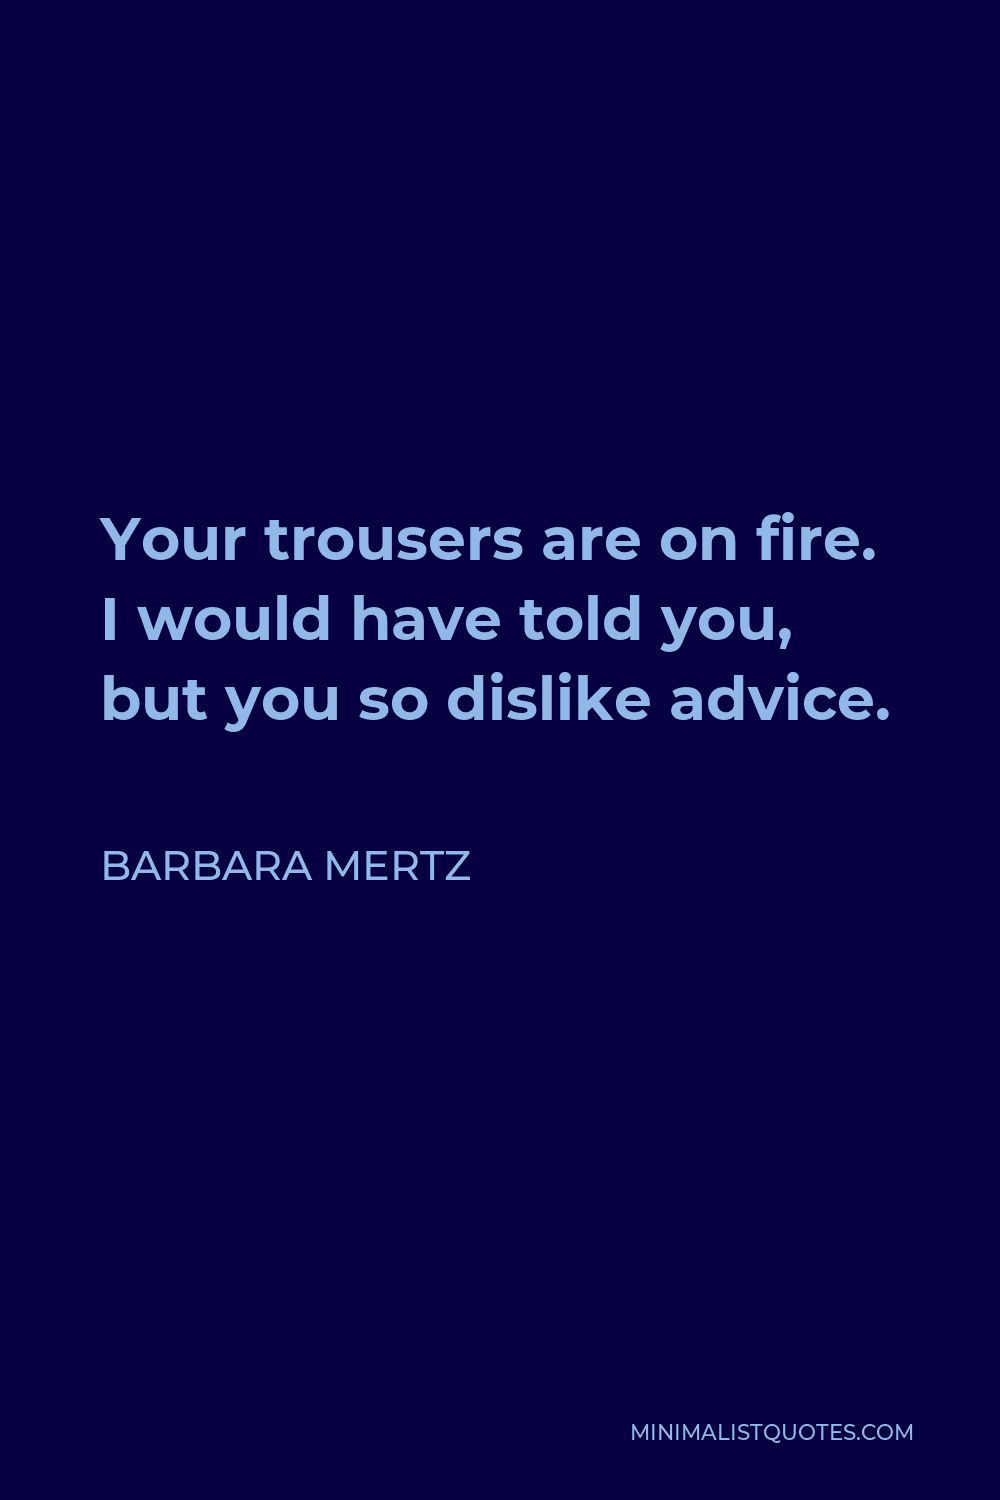 Barbara Mertz Quote - Your trousers are on fire. I would have told you, but you so dislike advice.